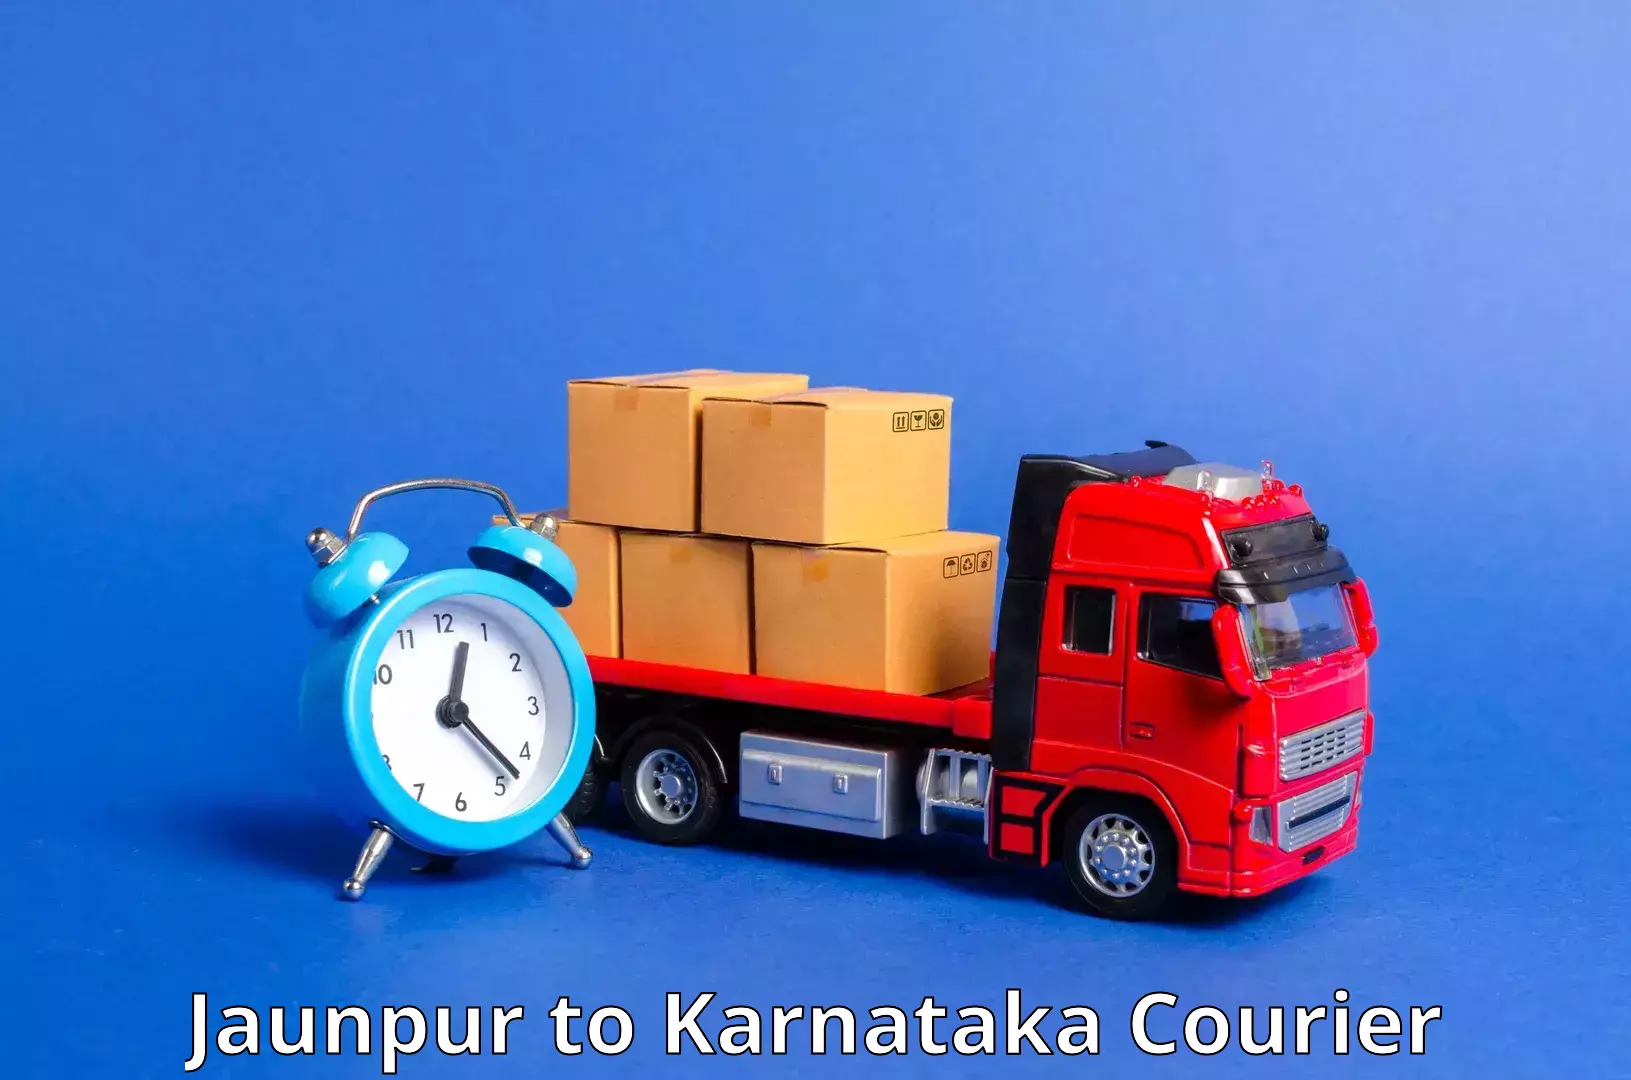 Cash on delivery service Jaunpur to Mudhol